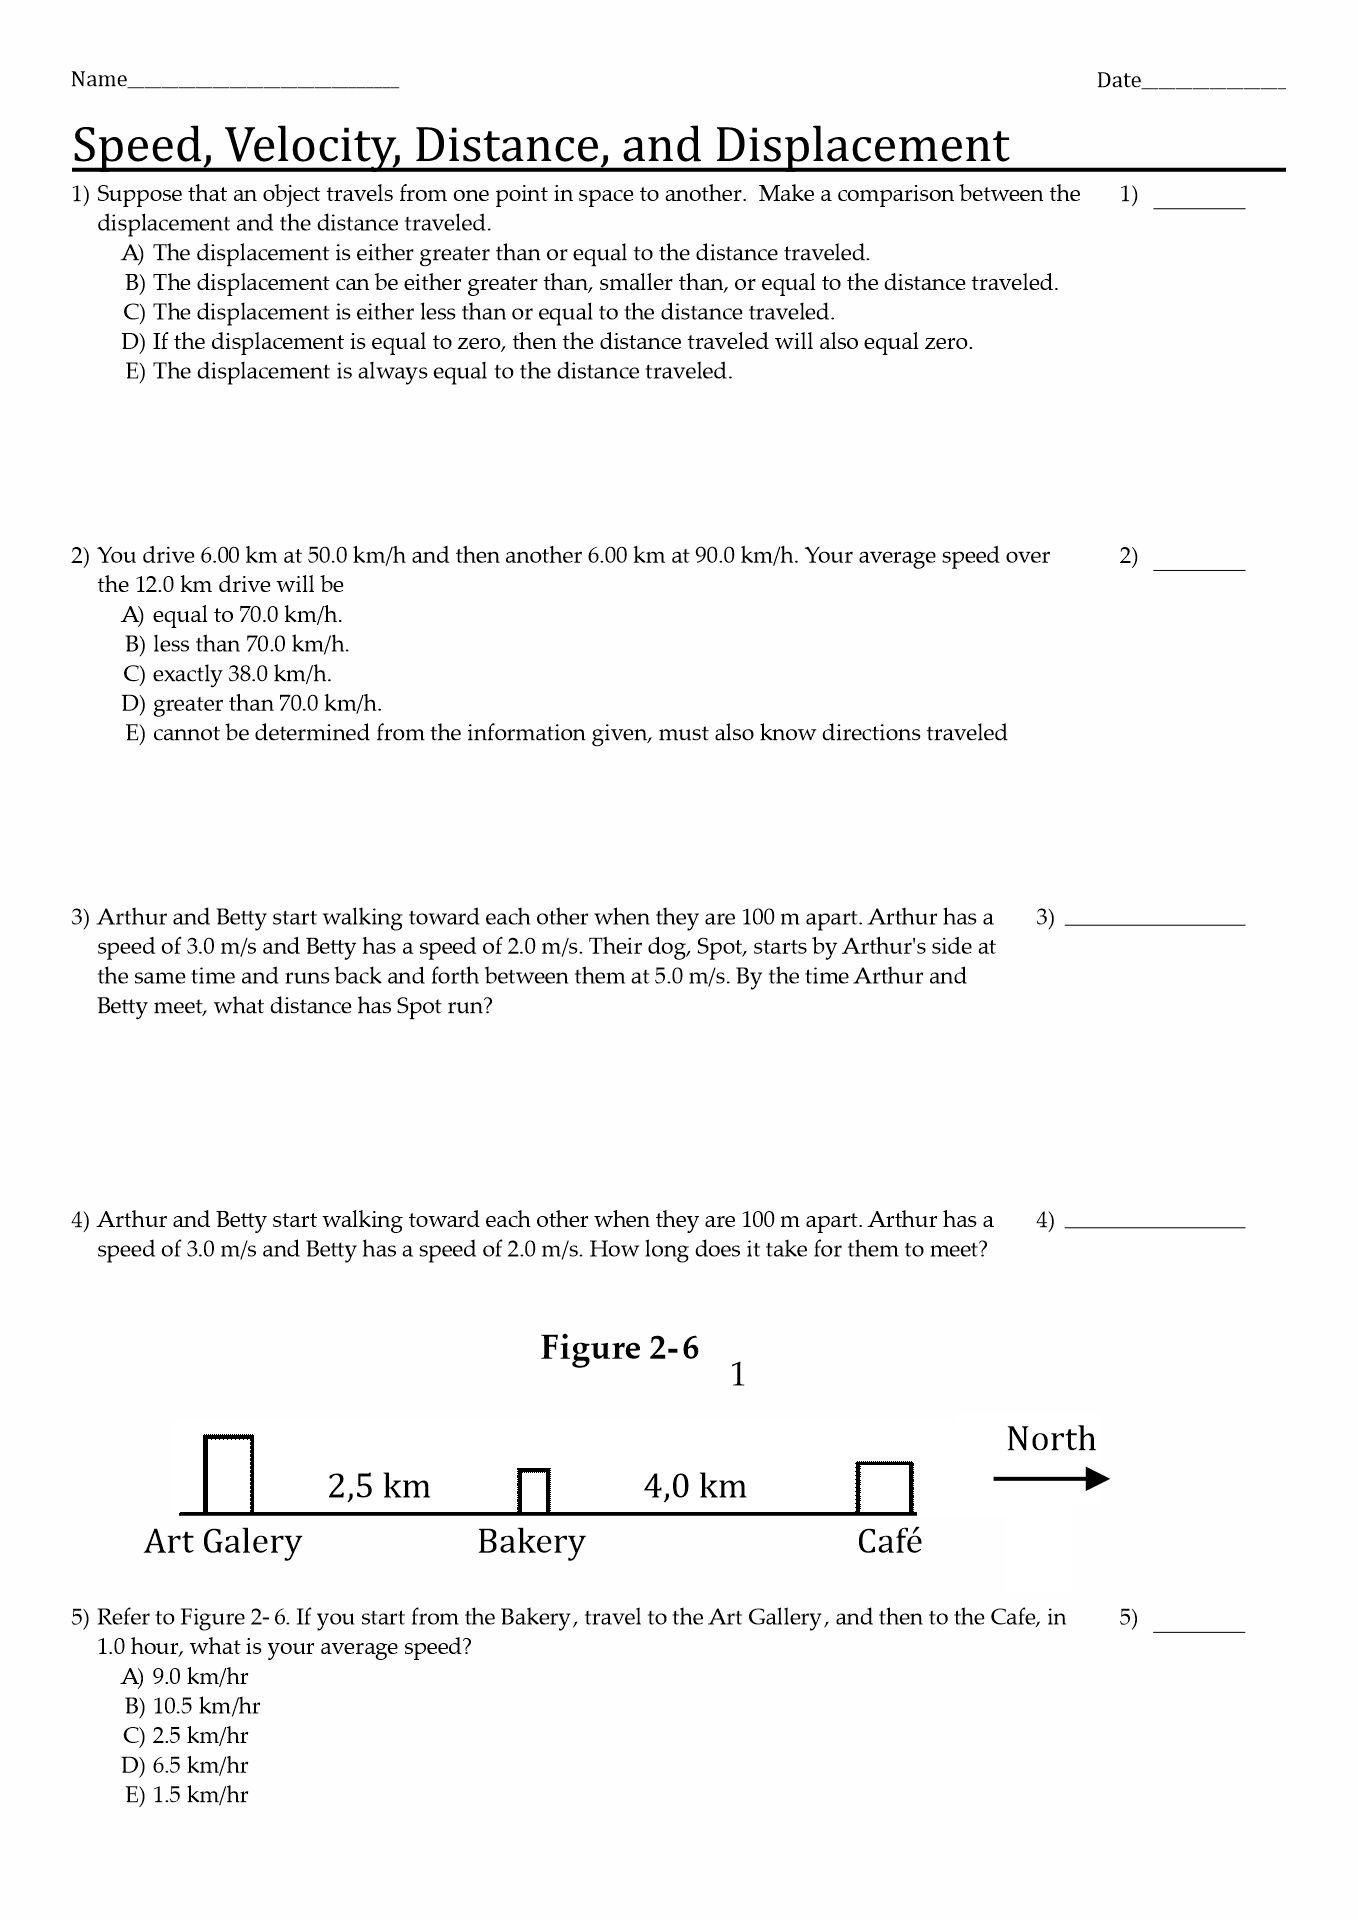 Distance and Displacement Worksheet Image